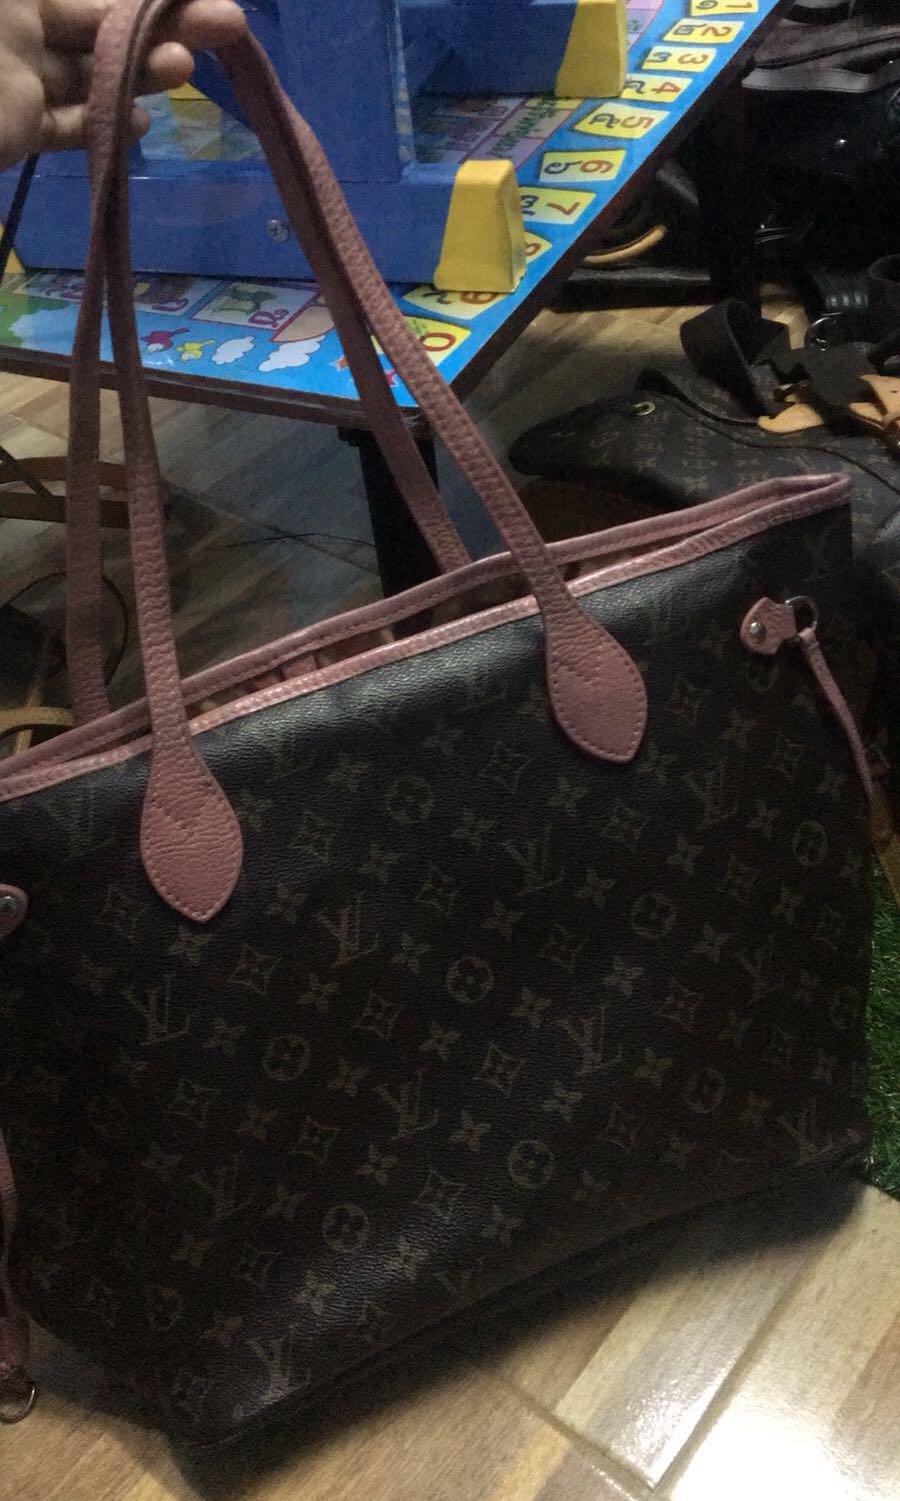 Sold at Auction: A Limited Edition Neverfull, Monogram Ikat MM Rose Indien  Louis Vuitton